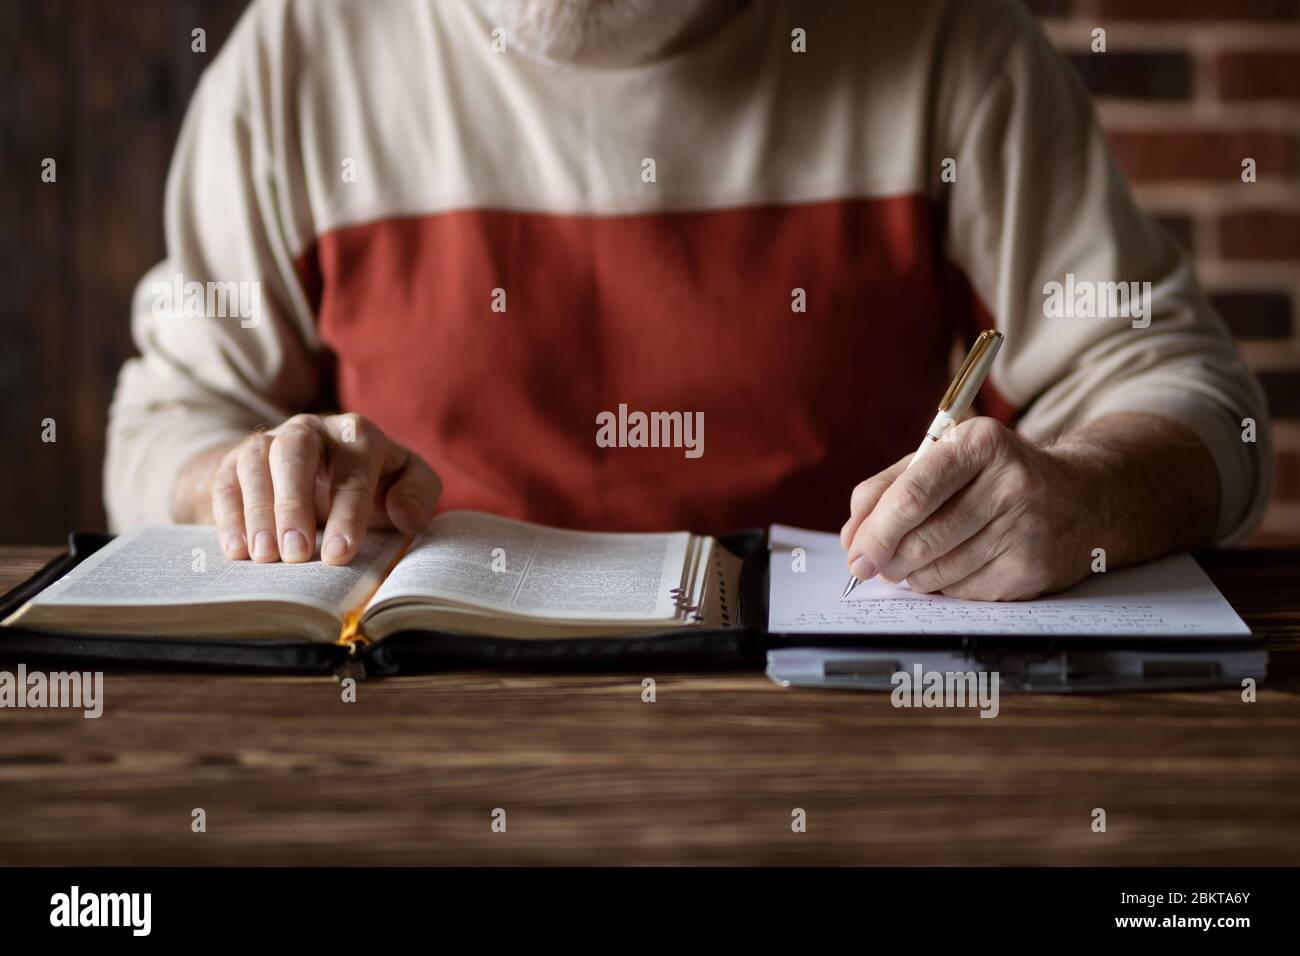 Bible study following the word of Scripture and copying it on paper. Taking notes and study of the Holy Bible. Searching for a spiritual subject Stock Photo